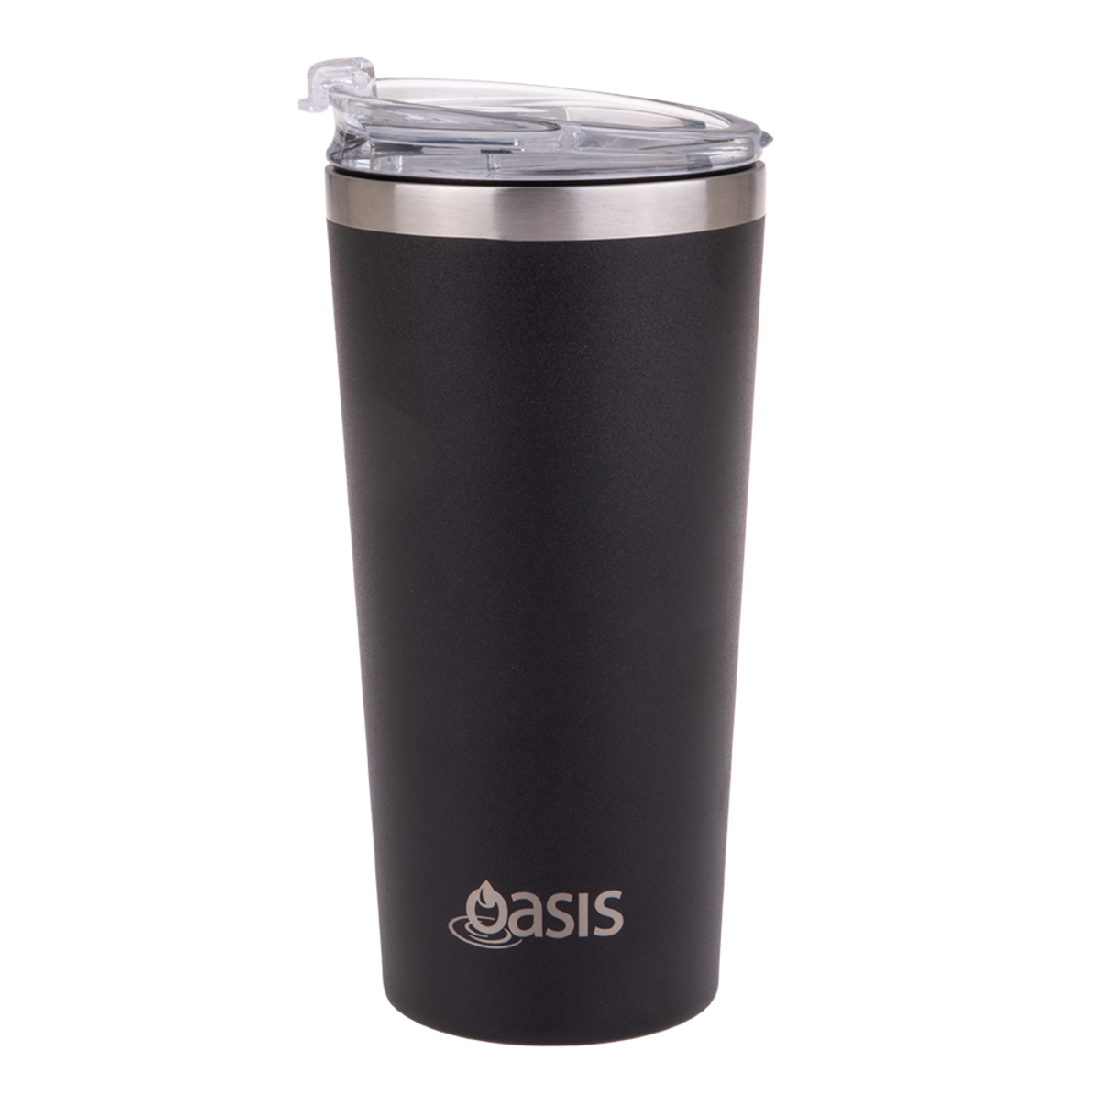 Oasis S/s Double Wall Insulated 'travel Mug' 480ml - Matte Black